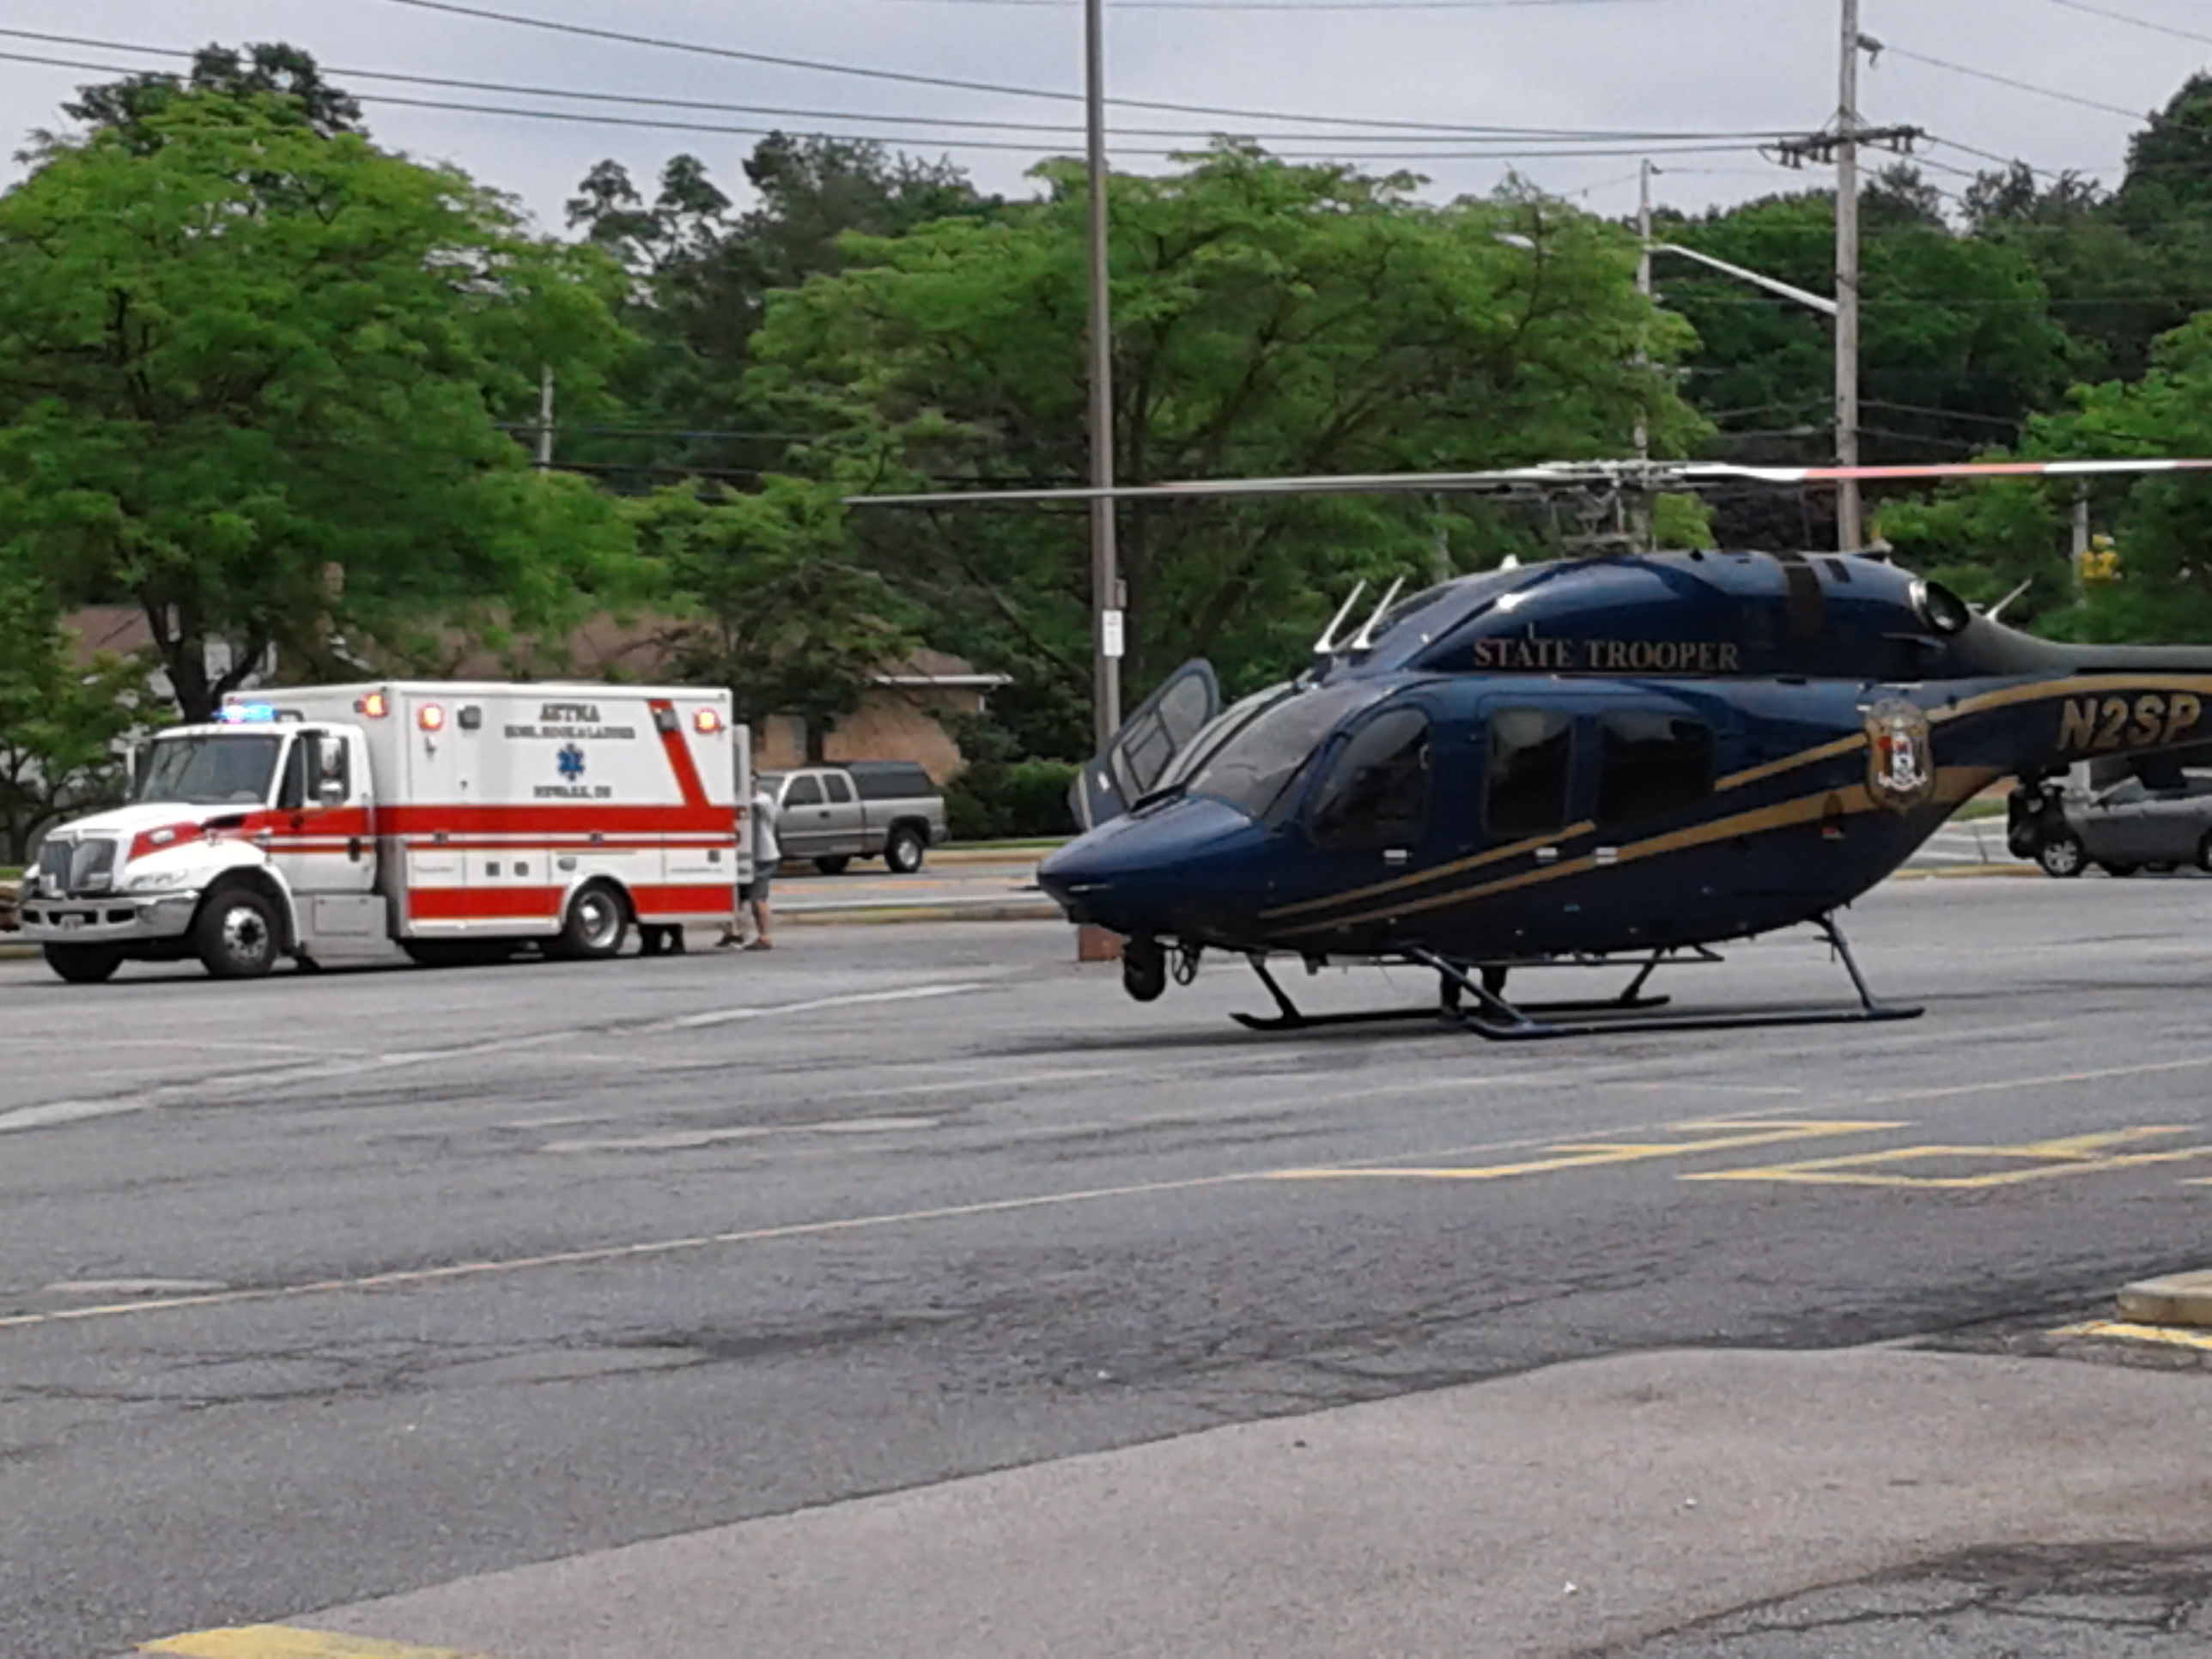 Motorcycle Accident In Newark, Helicopter Lands At Fairfield First